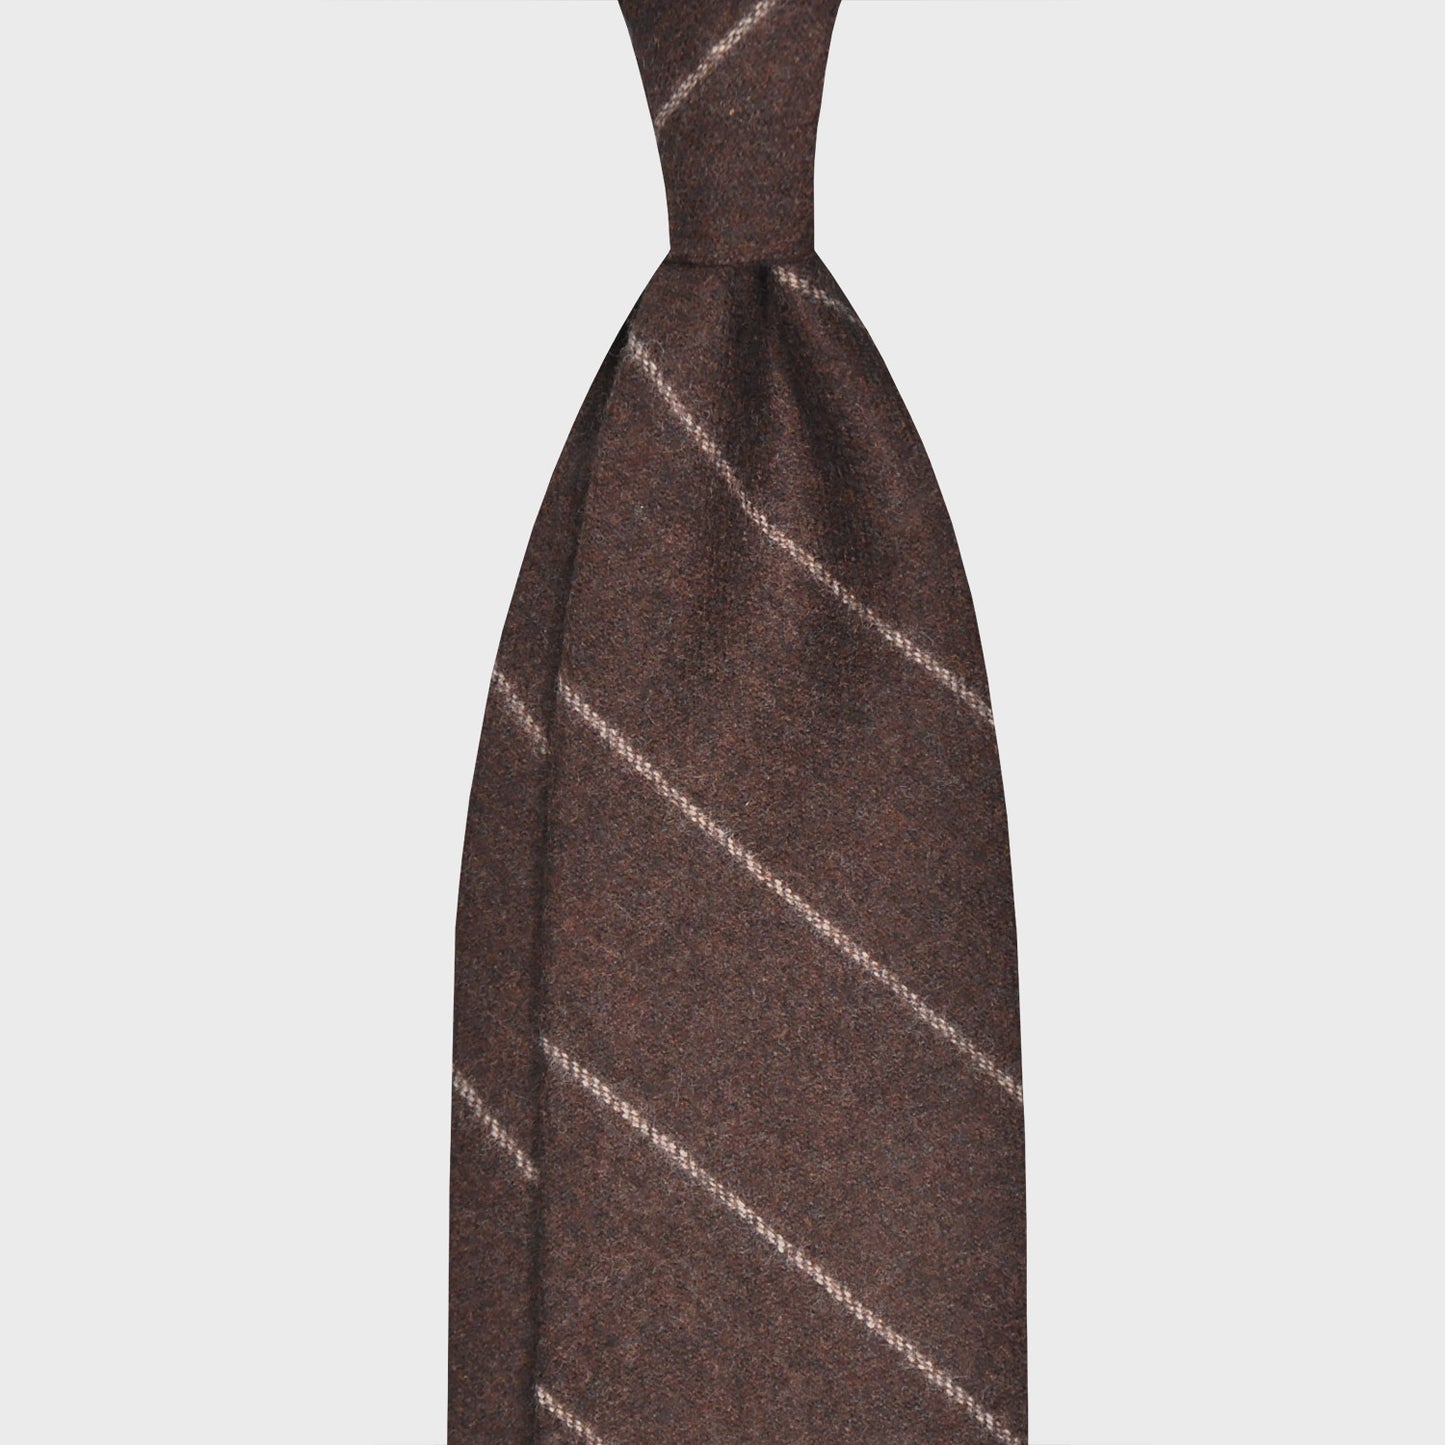 Coffee Brown Stripes Wool Tie Unlined 3 Folds. Soft flannel wool tie, handmade f marino napoli for Wools Boutique Uomo, coffee brown with ivory white stripes color, soft fabric to the touch, ideal for lovers of regimental wool ties